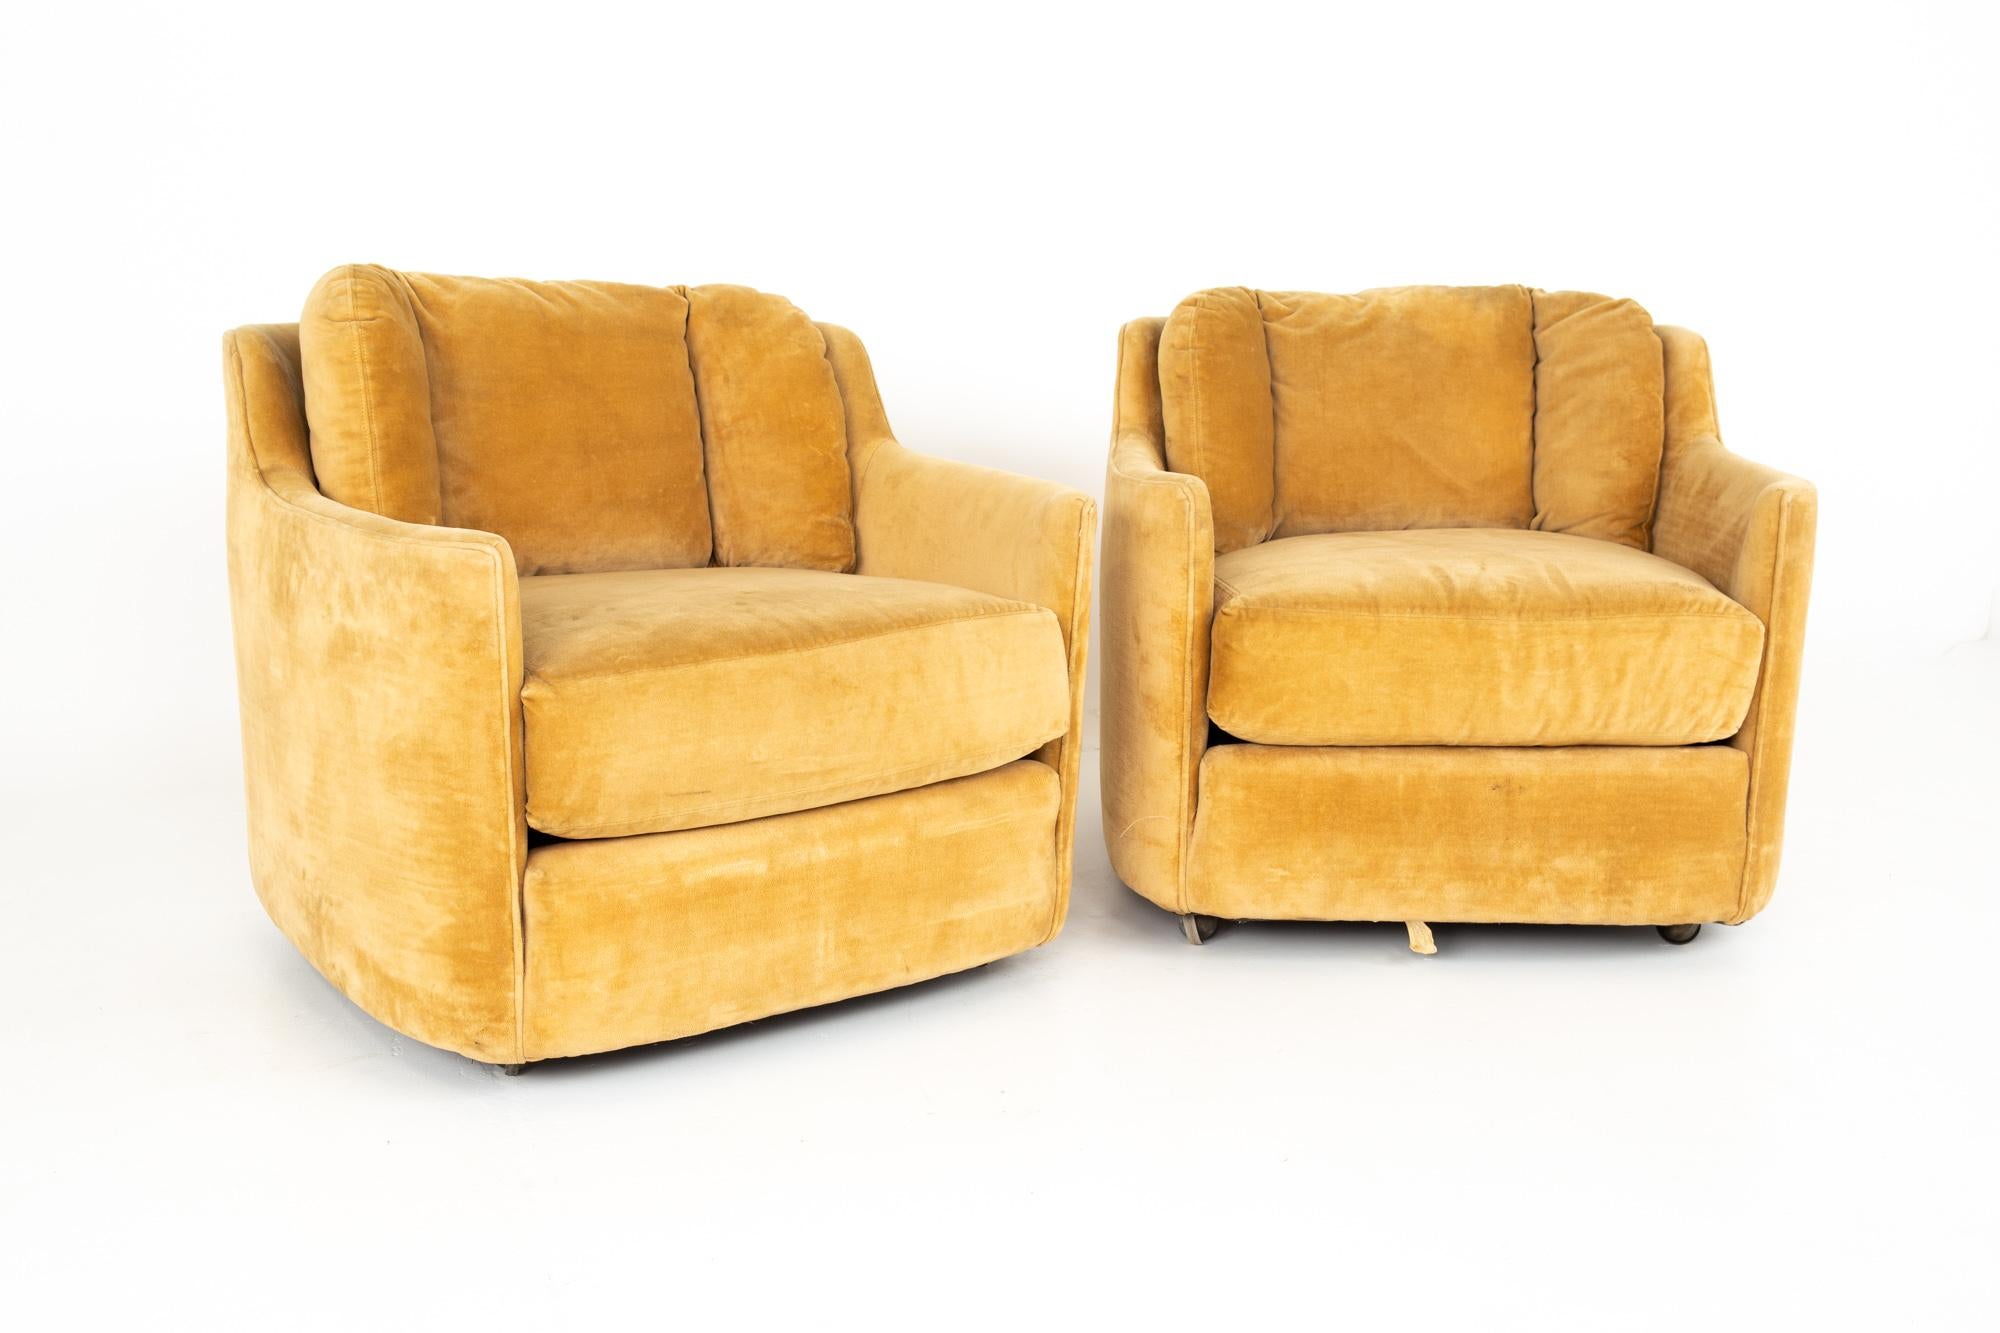 Henredon Folio 500 midcentury barrel lounge chairs - pair.
Each chair measures: 30.5 wide x 34.5 deep x 28 high, with a seat height of 17 inches

Each piece of furniture is available in what we call restored vintage condition. Upon purchase it is